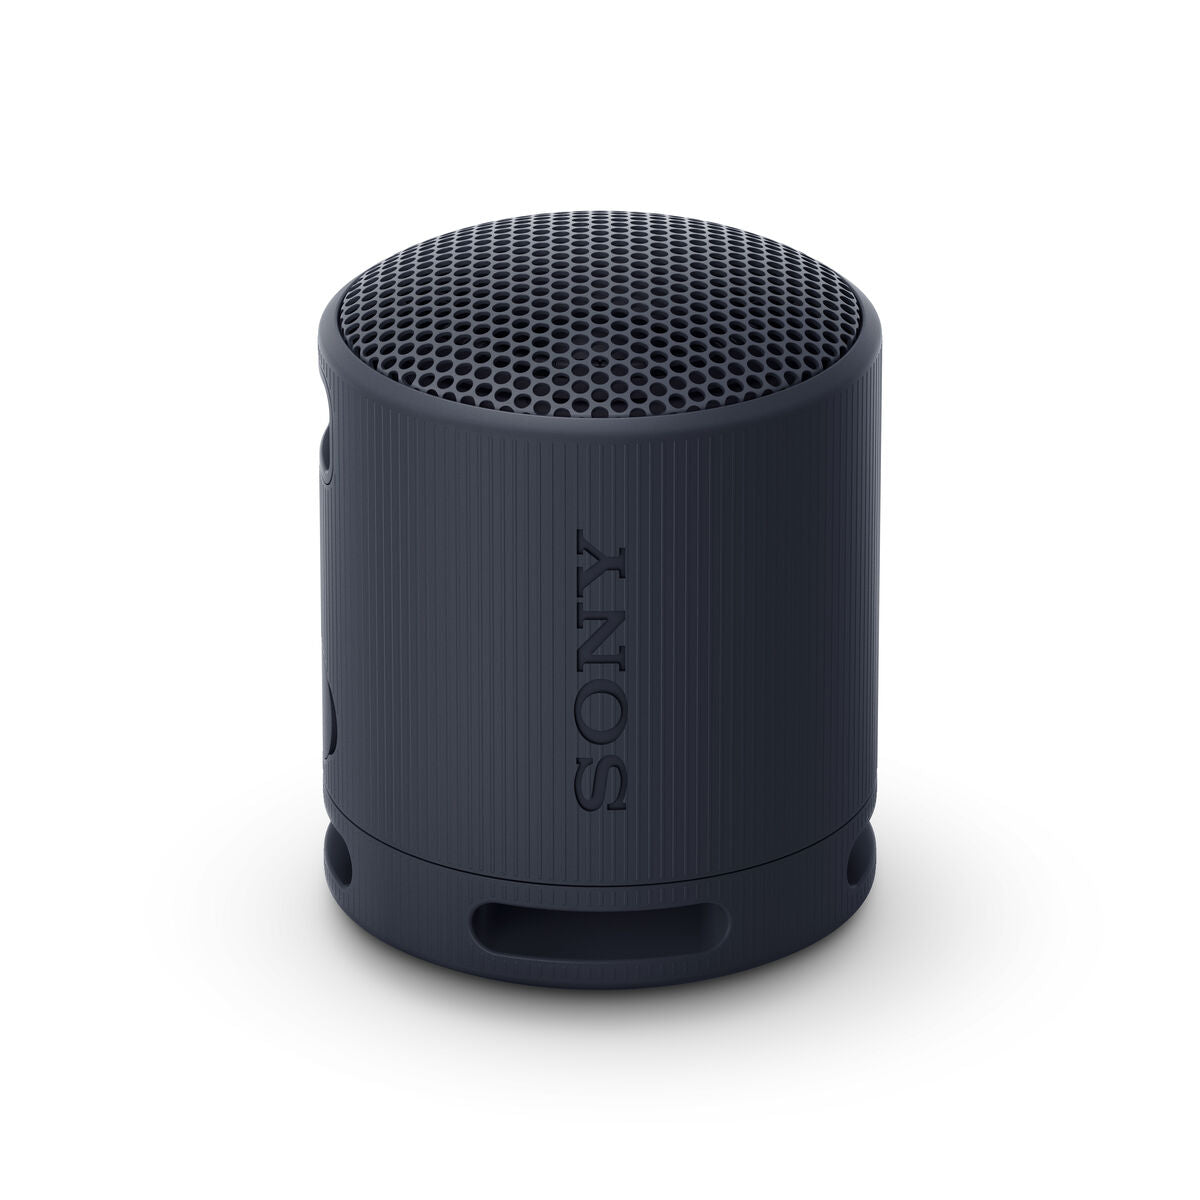 Bluetooth Speakers Sony Black, Sony, Electronics, Audio and Hi-Fi equipment, bluetooth-speakers-sony-black, Brand_Sony, category-reference-2609, category-reference-2637, category-reference-2882, category-reference-t-19653, category-reference-t-7441, category-reference-t-7442, category-reference-t-7450, cinema and television, Condition_NEW, entertainment, music, Price_50 - 100, Teleworking, RiotNook